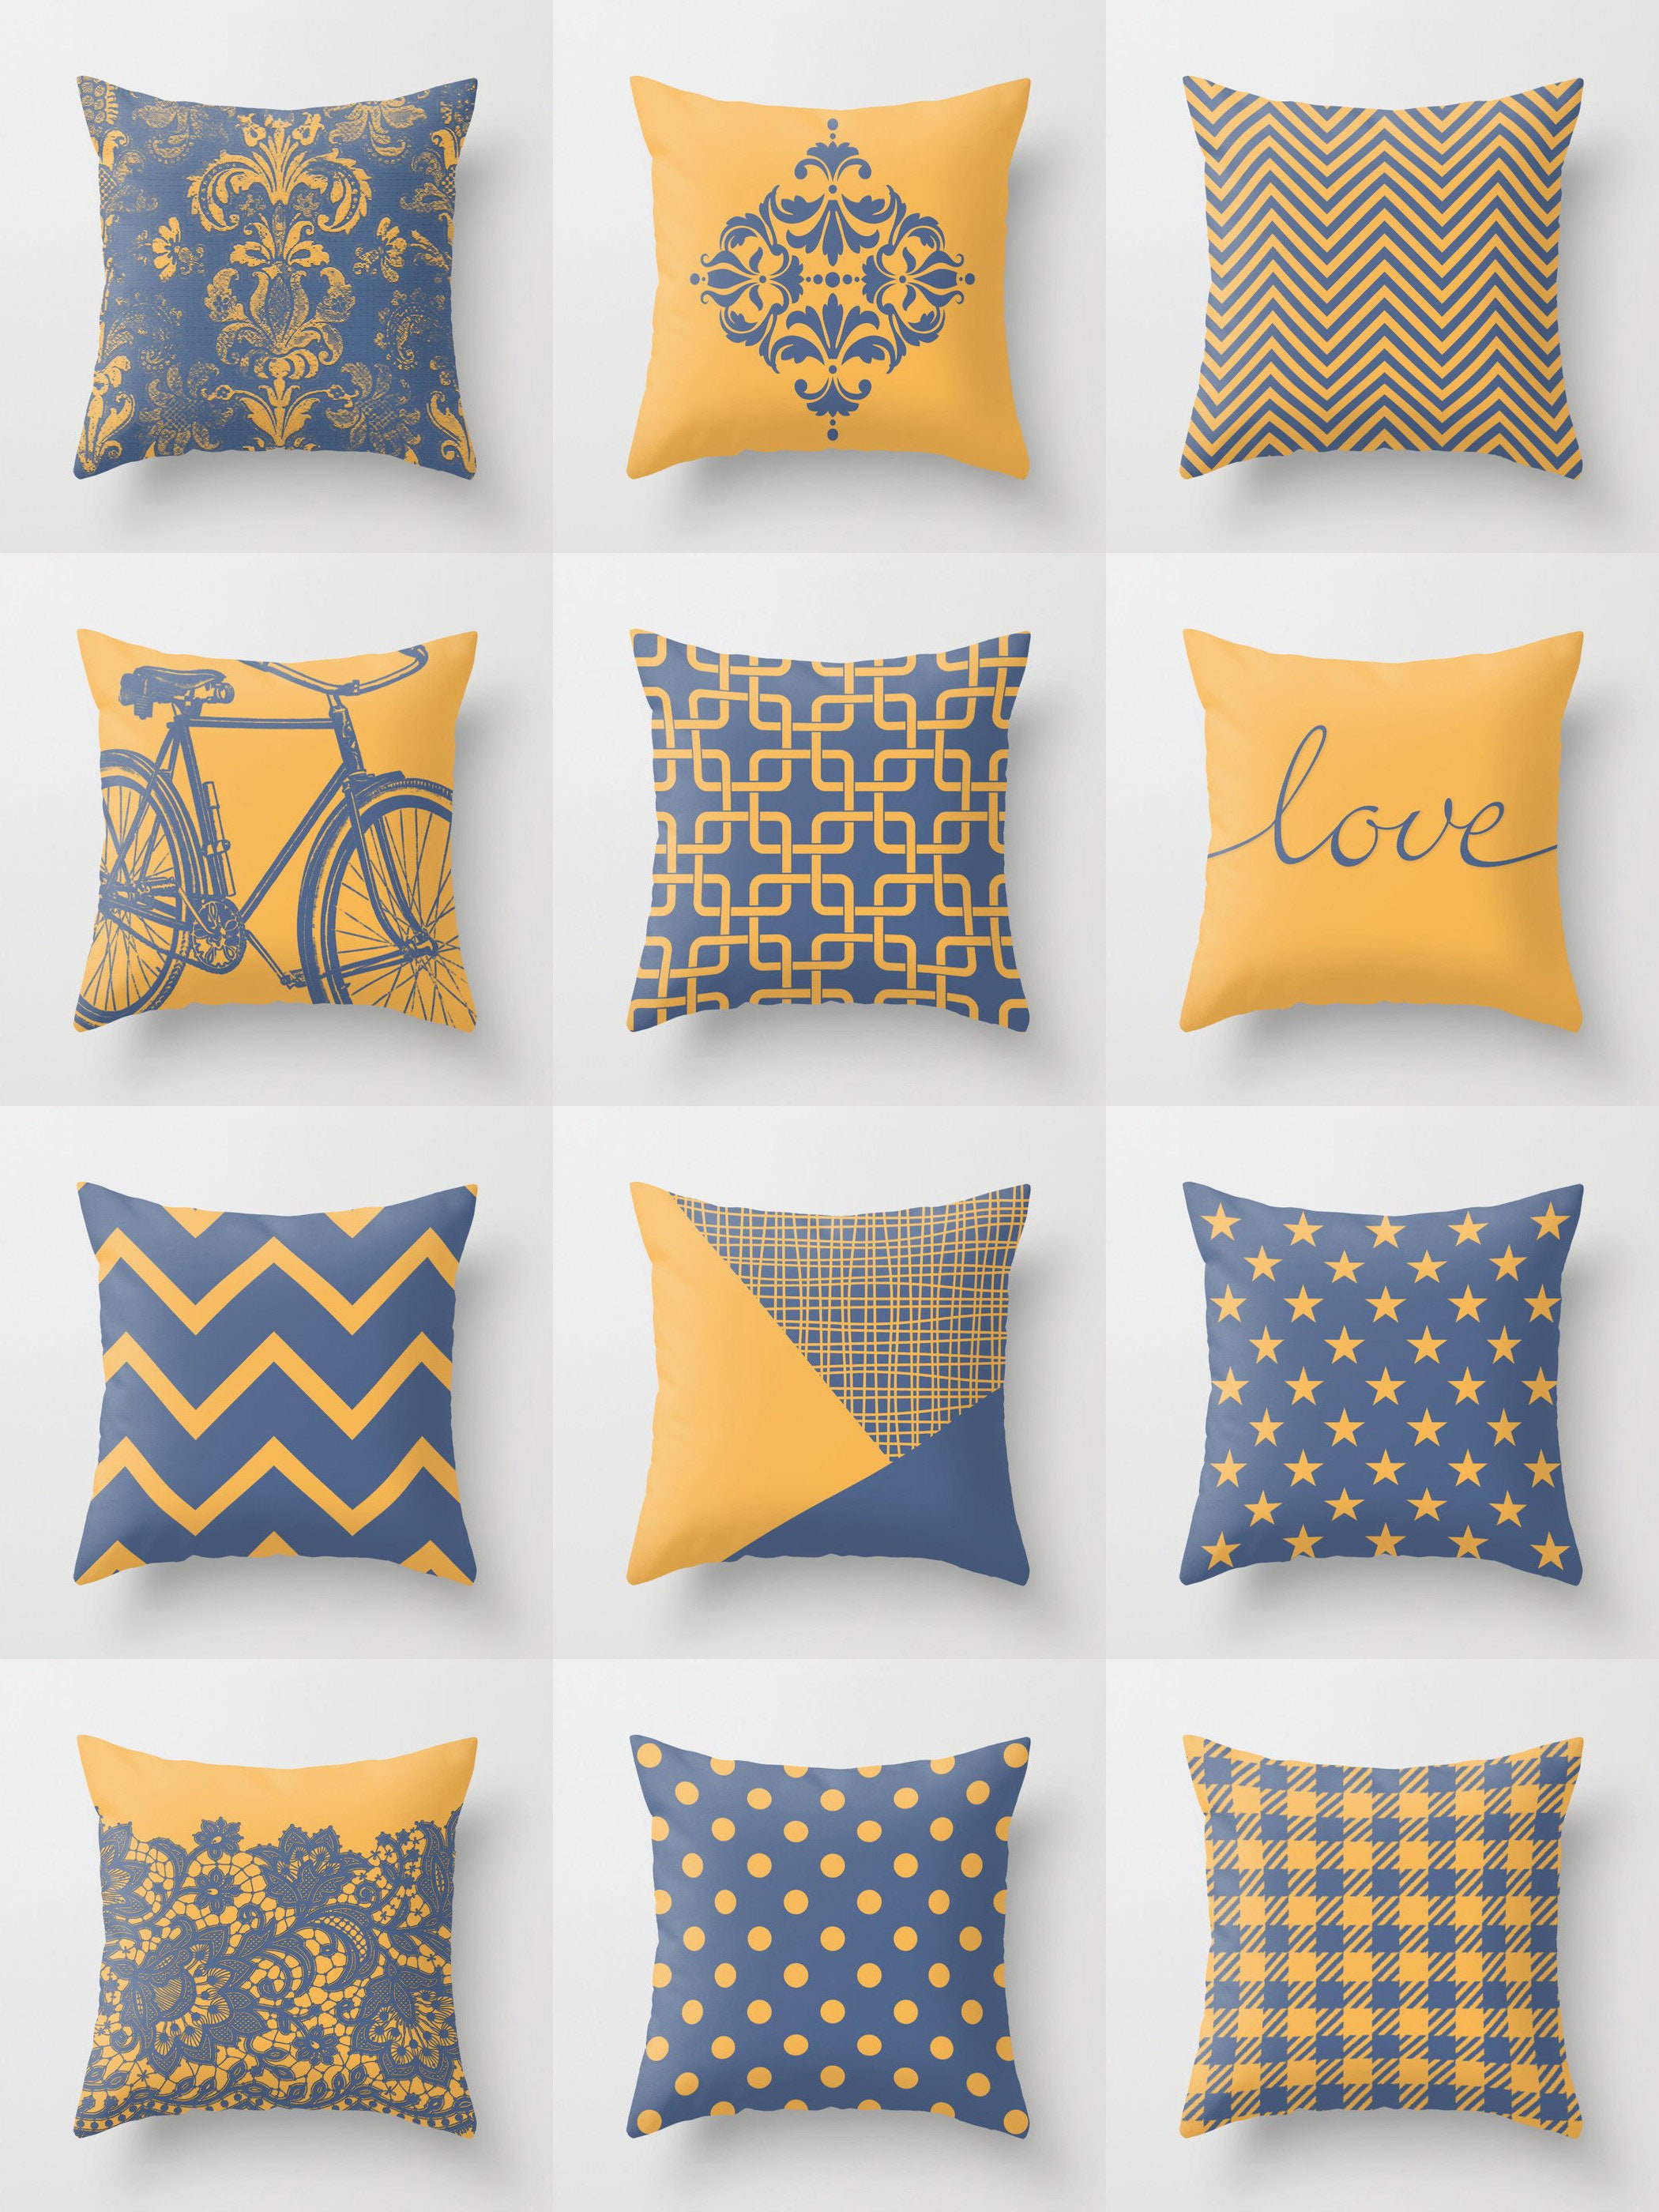 Saffron Yellow Dusty Blue Throw Pillow Mix and Match Indoor Outdoor Cushion  Cover Accent Couch Toss Bright Vivid Melange Houndstooth Corn 